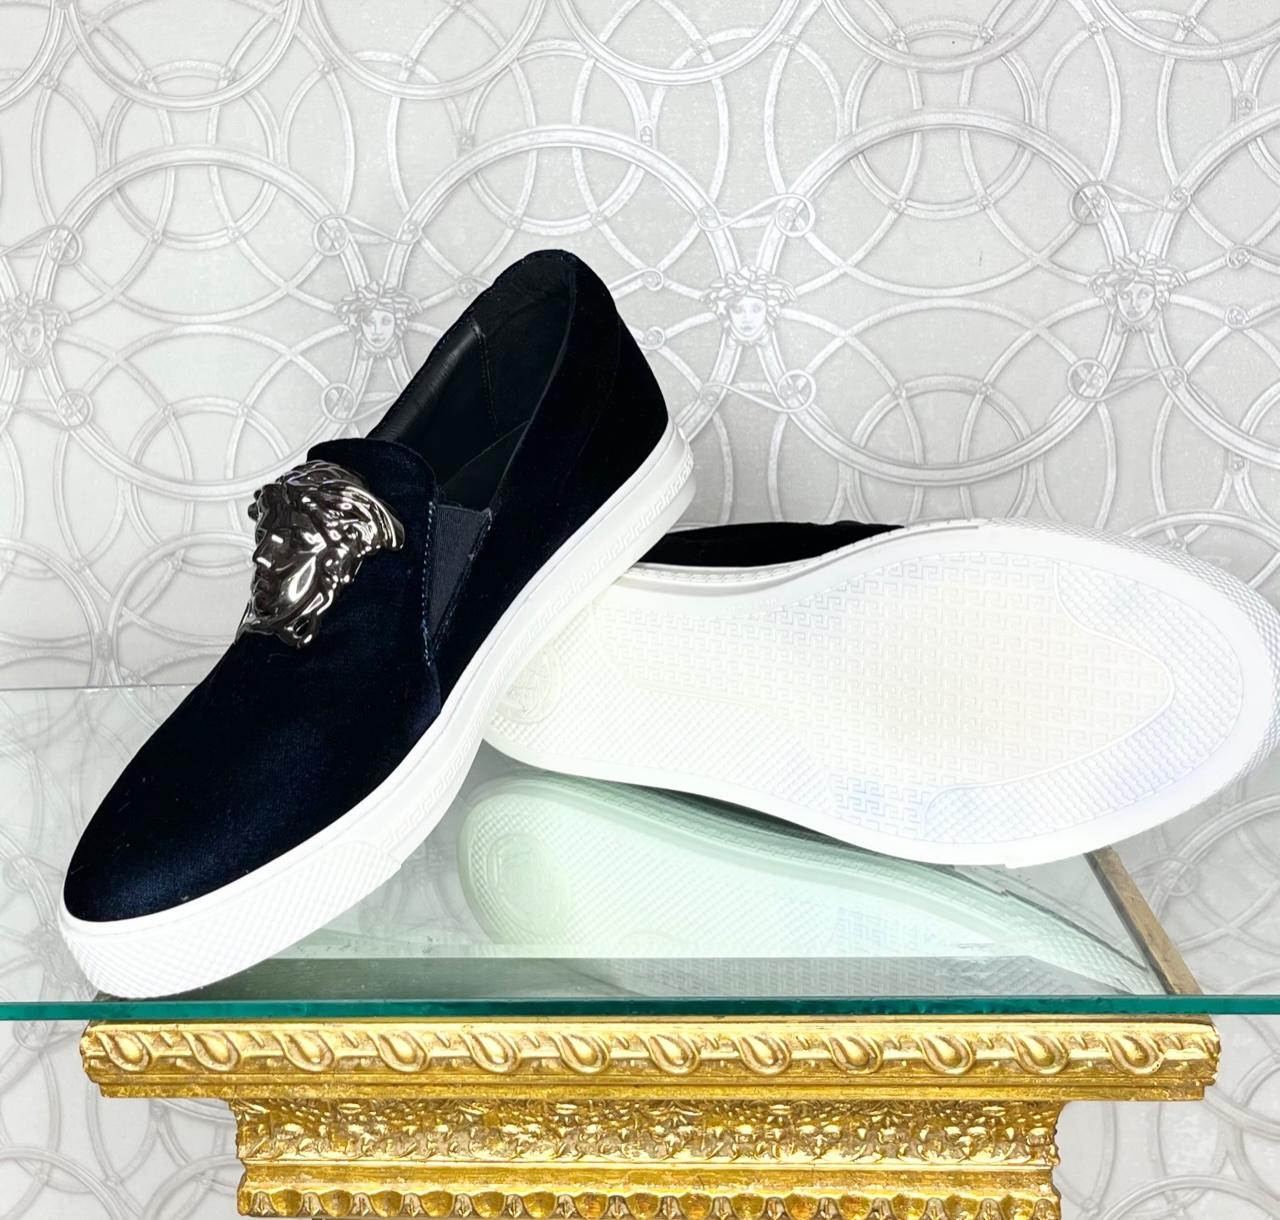 VERSACE NAVY BLUE PALAZZO MEDUSA SLIP ON VELVET SNEAKERS Sz 42 - 9 In New Condition For Sale In Montgomery, TX